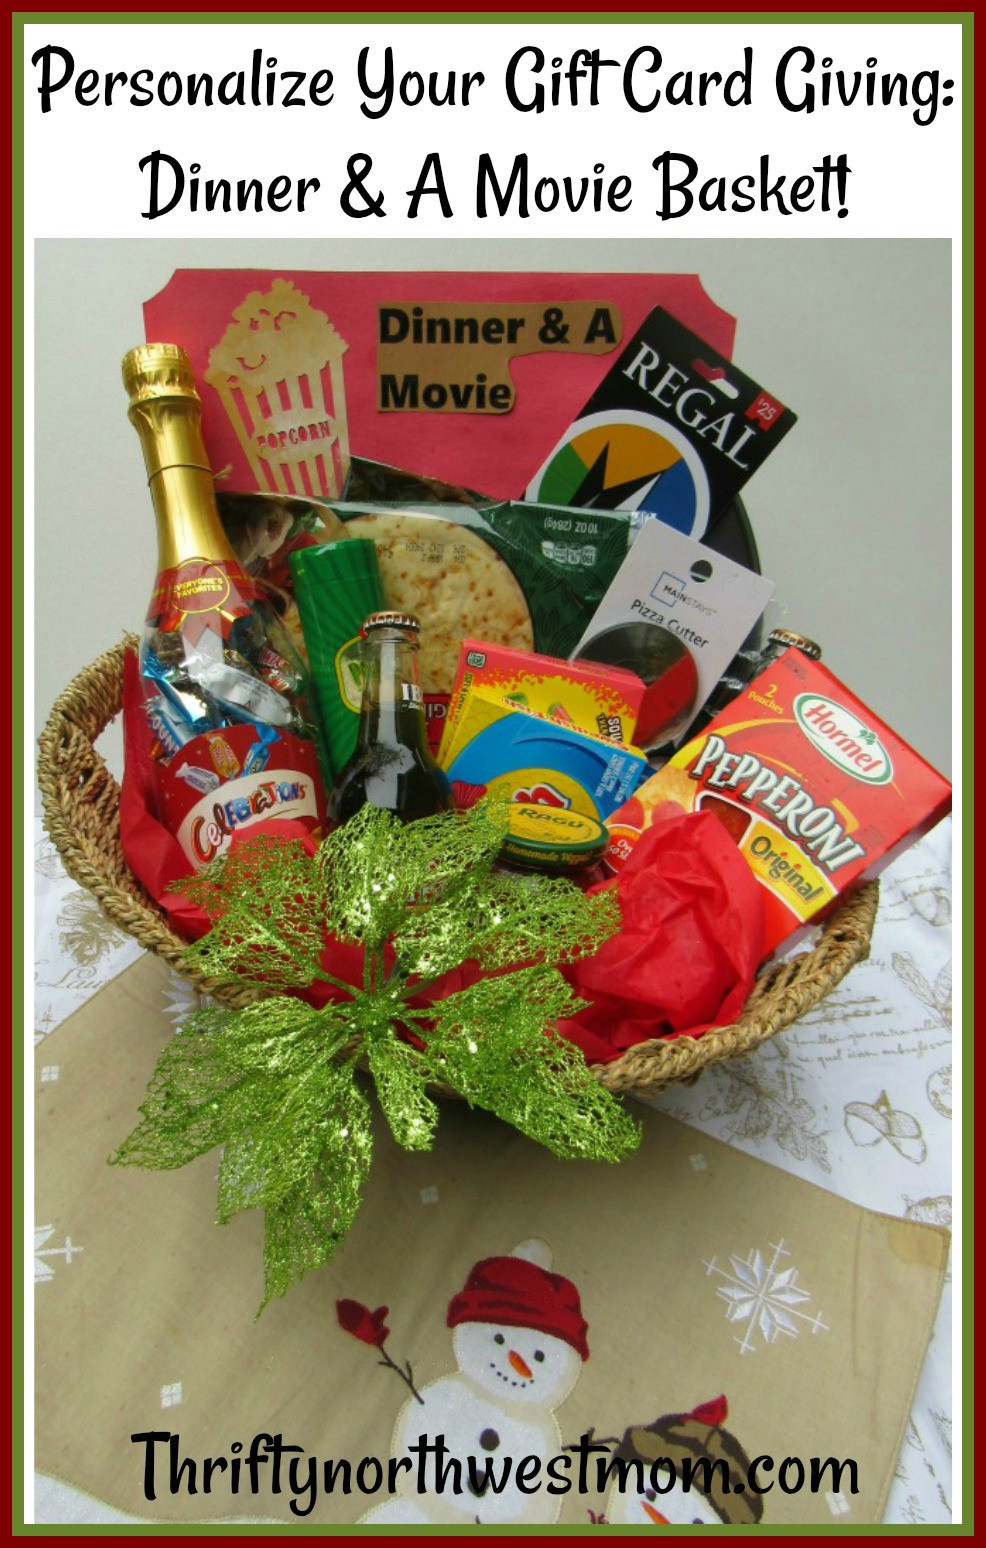 Movie Gift Card Basket Ideas
 Dinner & A Movie Gift Basket Idea How to Personalize